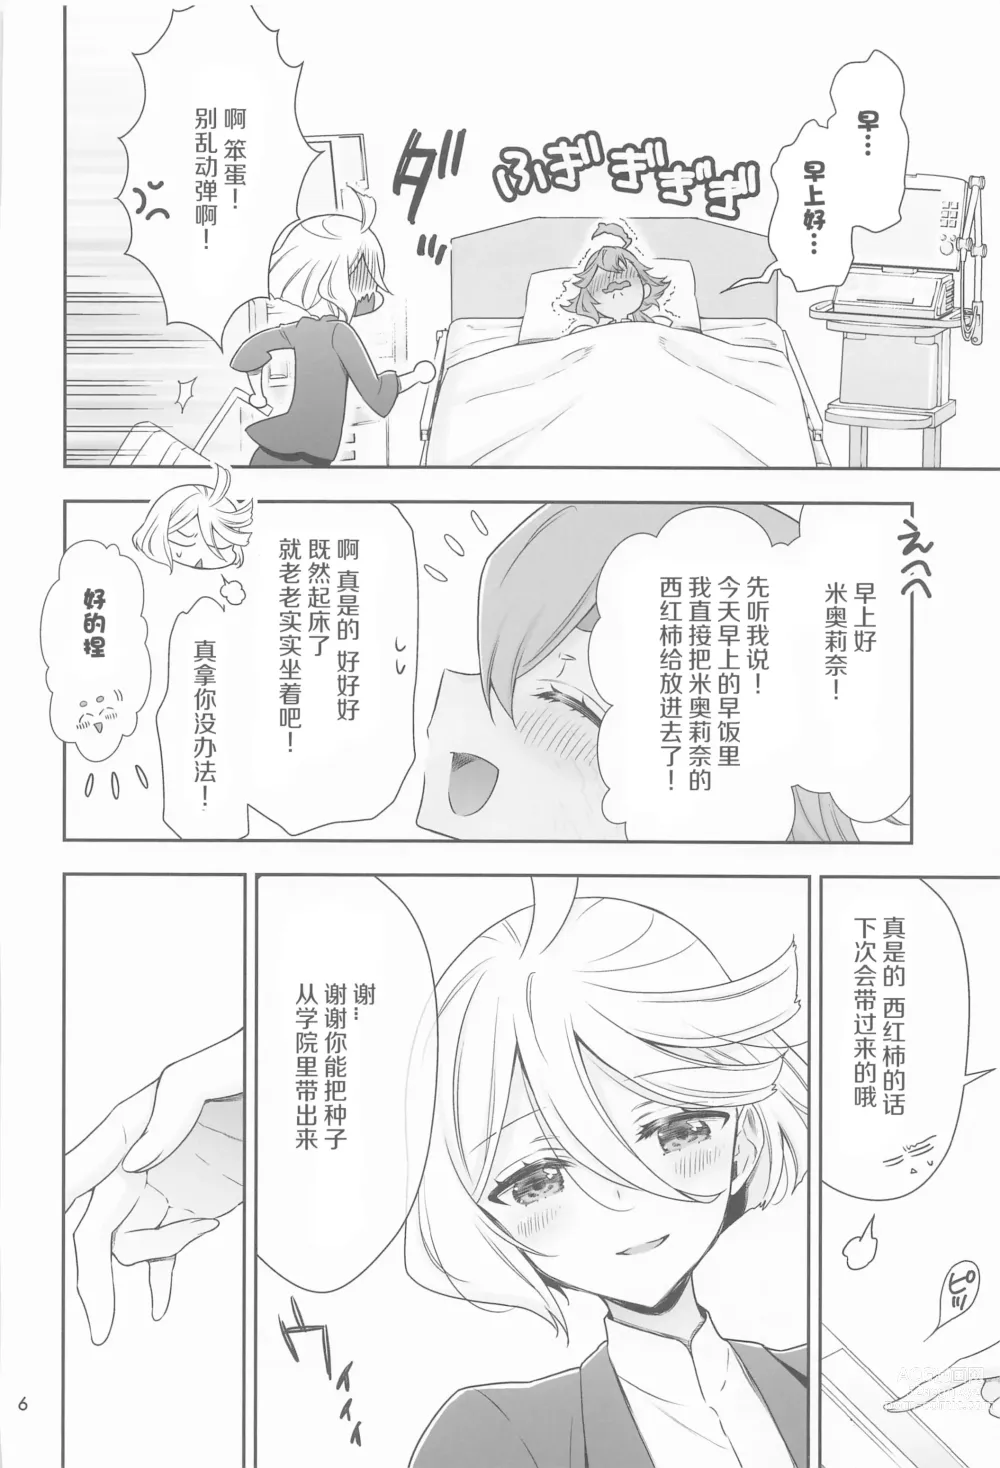 Page 6 of doujinshi 祝福之日